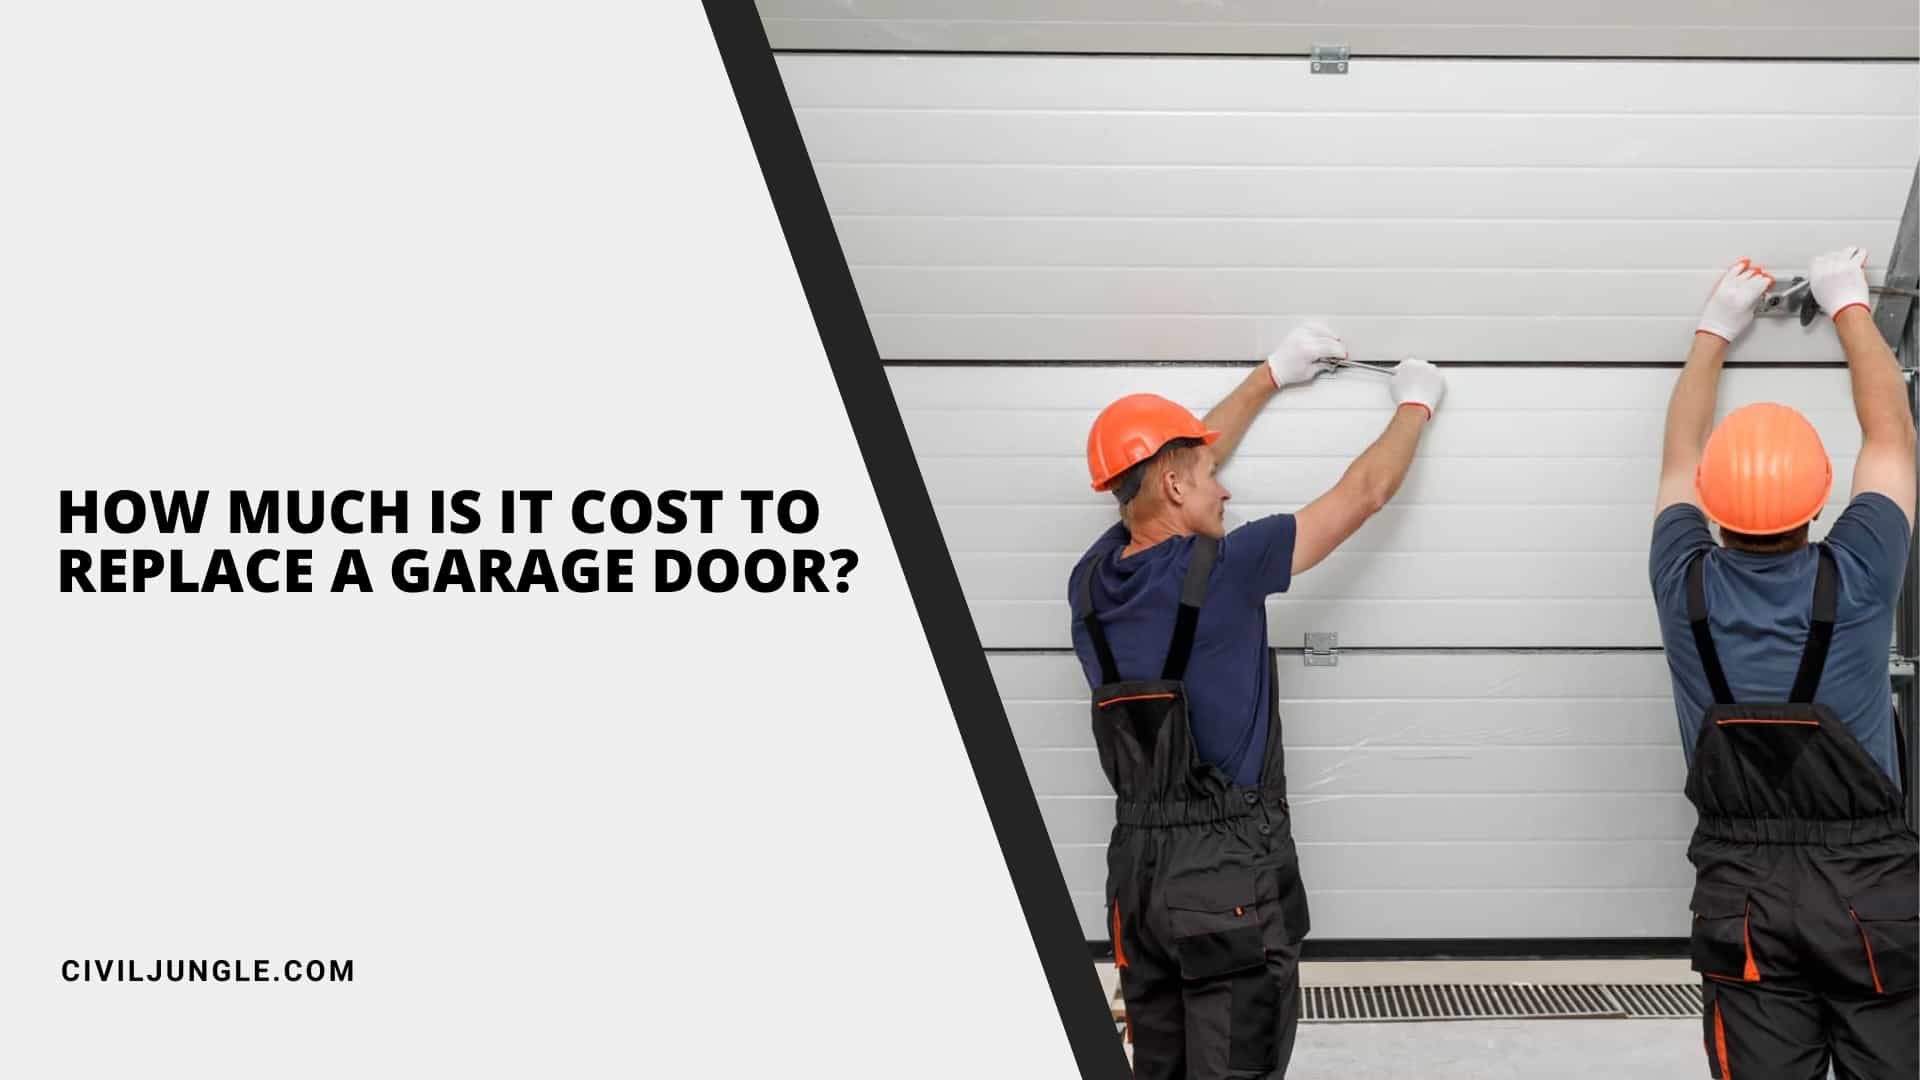 How Much Is It Cost to Replace a Garage Door?